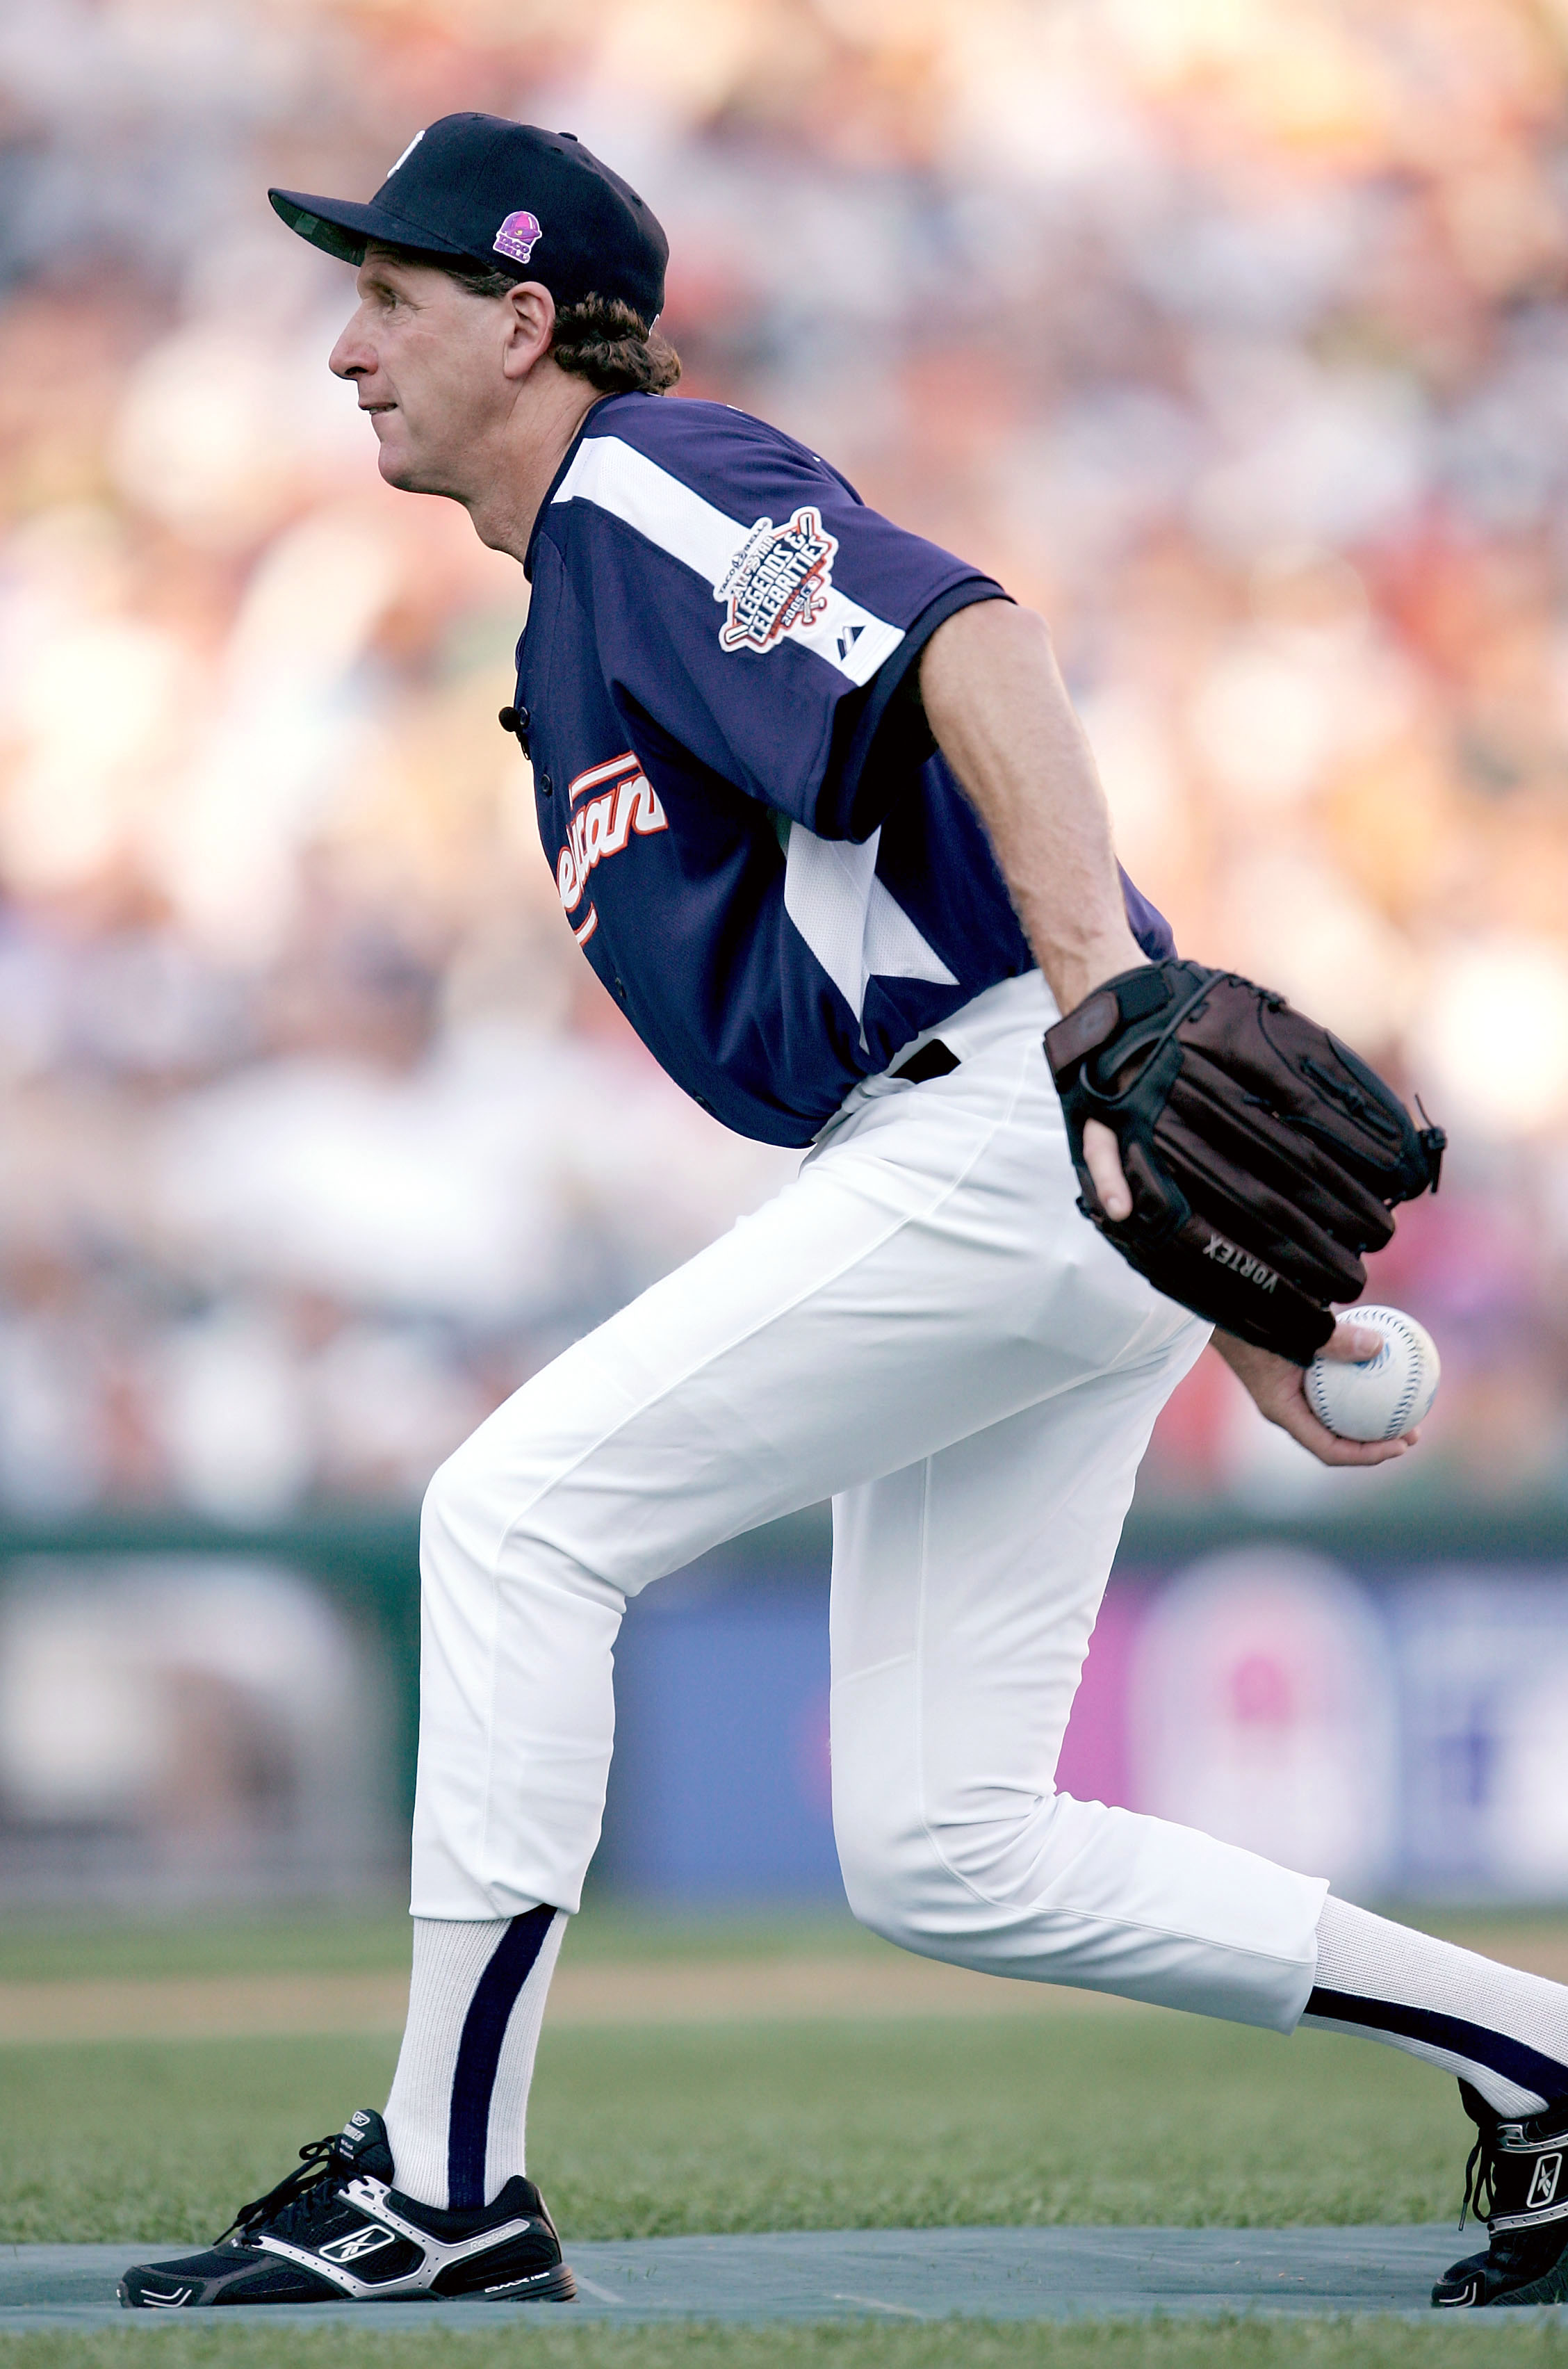 DETROIT - JULY 10:  Former MLB pitcher Mark Fidrych of the Legends Team smiles on the mound during the 2005 Major League Baseball Legends/Celebrity Game at Comerica Park on July 10, 2005 in Detroit, Michigan.  (Photo by Jonathan Daniel/Getty Images)